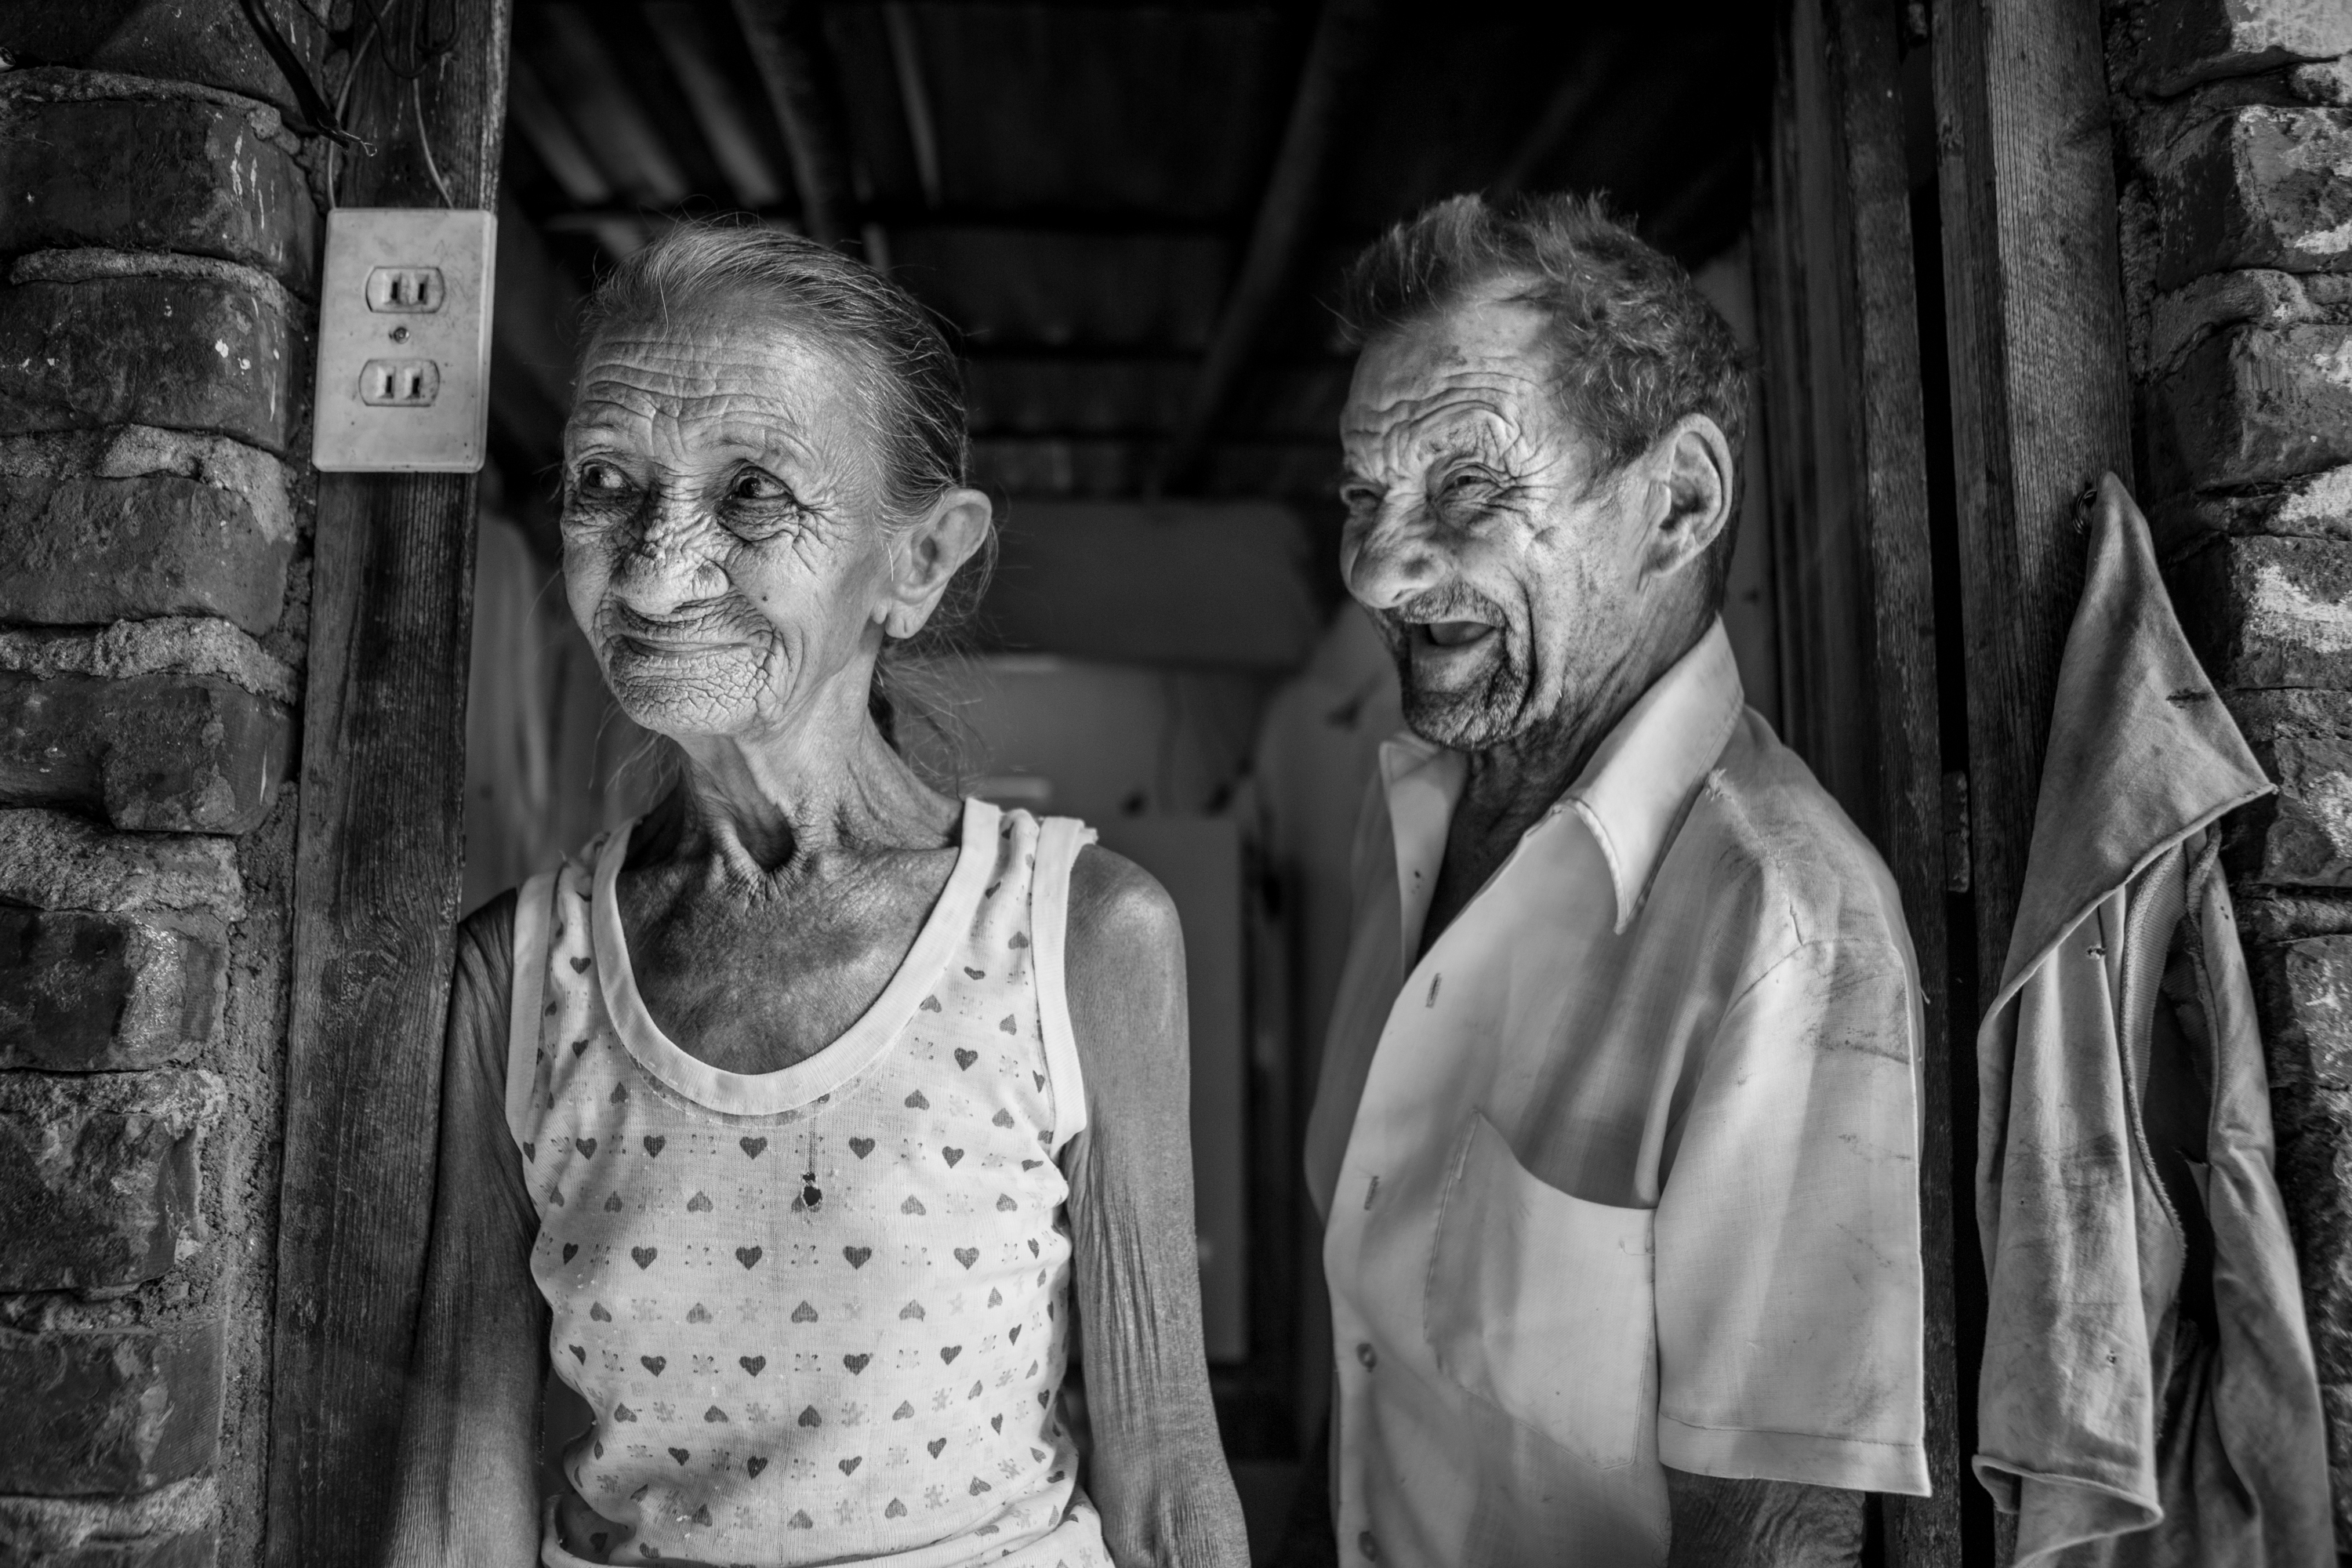 Georgina Medina Calzada and Martin Cantiyo Hernandez have been married for 53 years and live in a small house in Trinidad, Cuba. Photo by Sarah Ann Jump